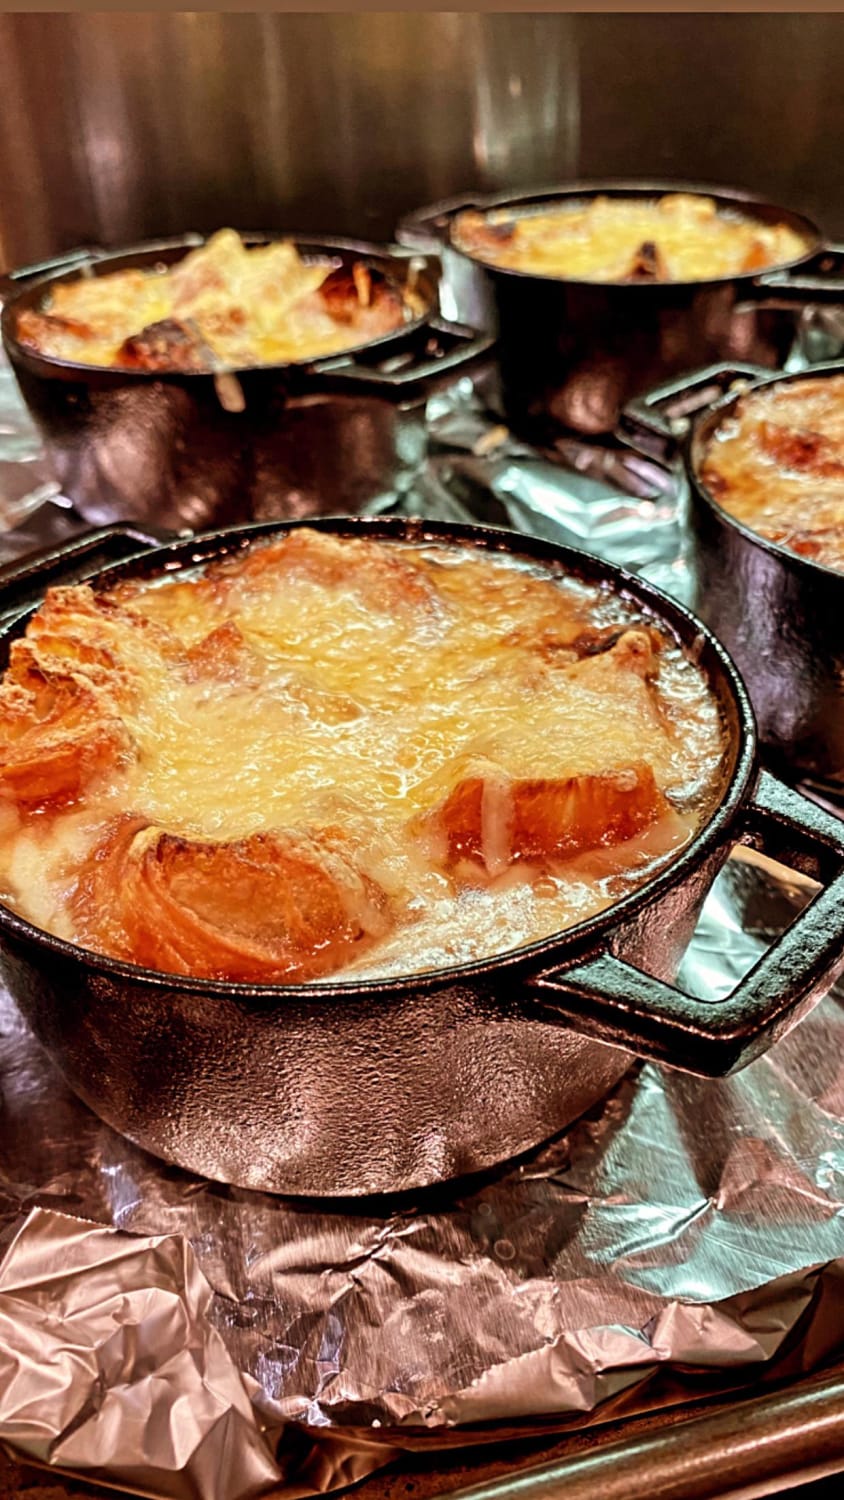 This French onion soup took me so long to make. Many tears were shed in the process.